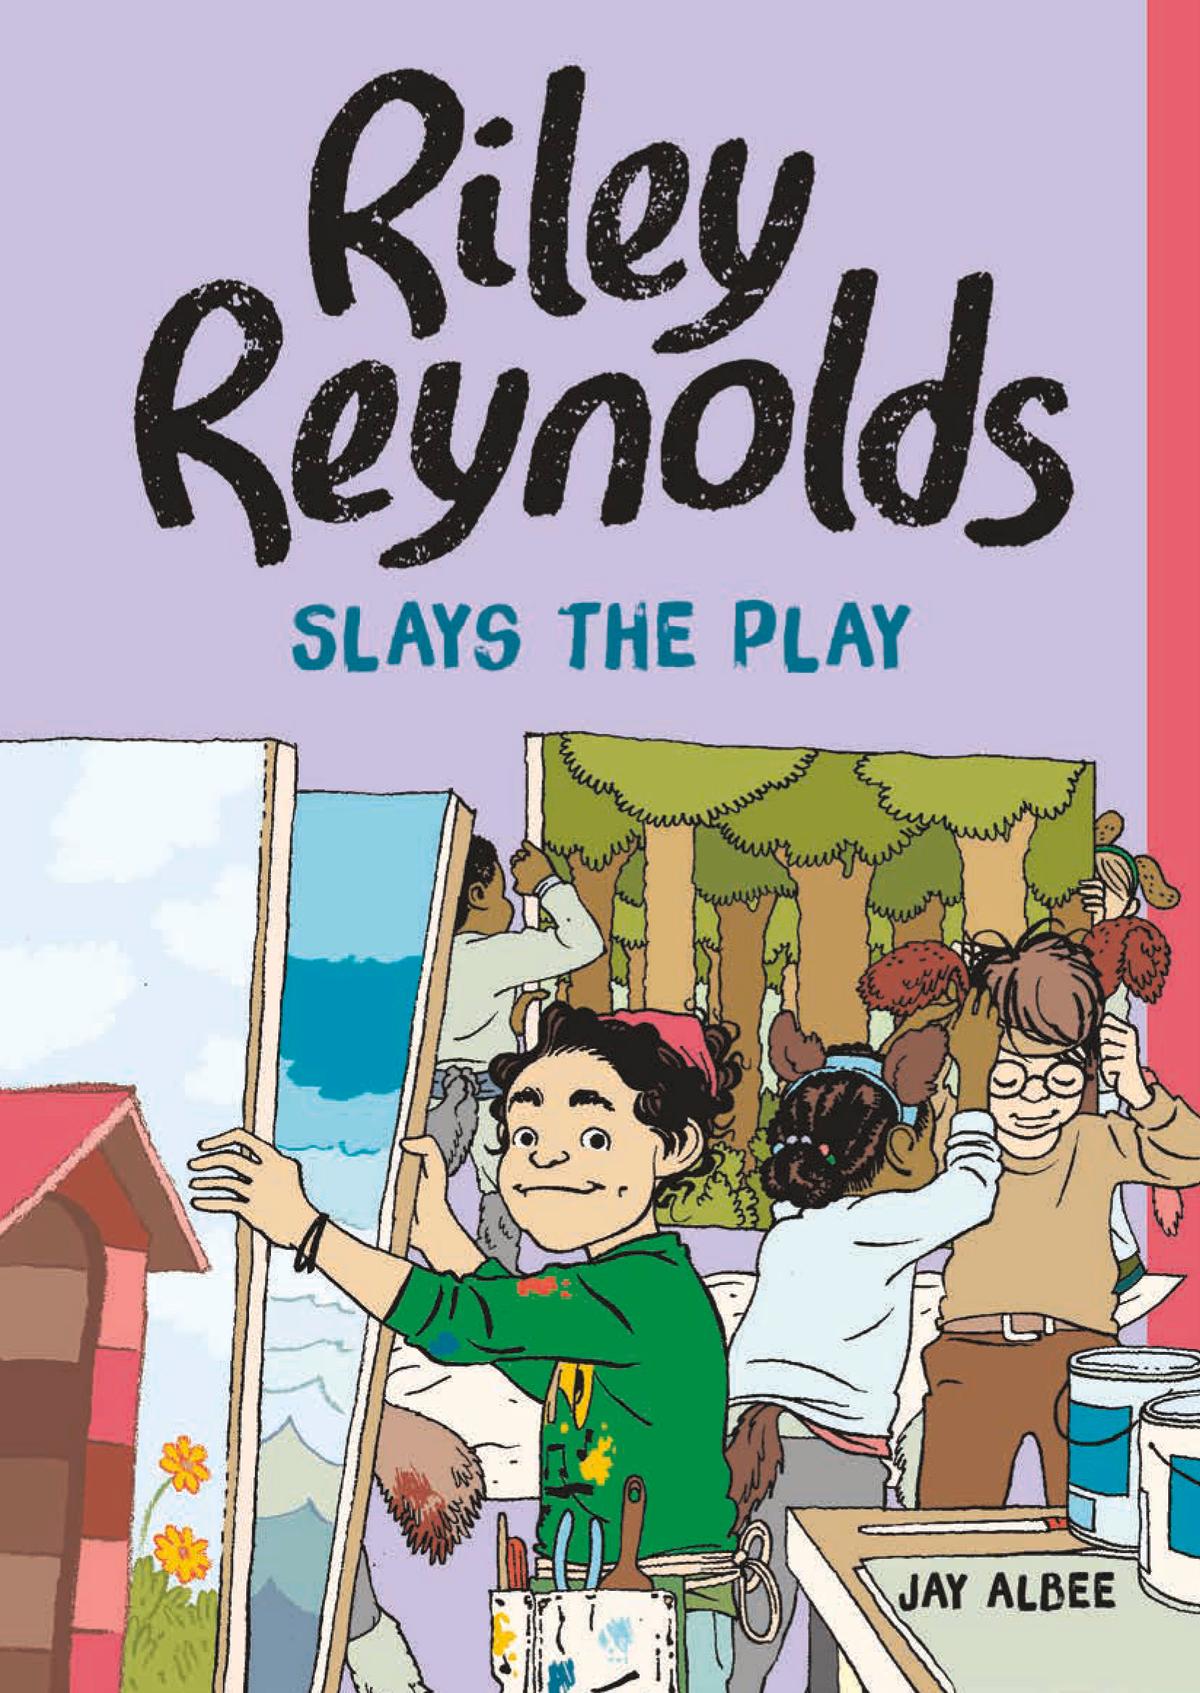 Cover illustration for Riley Reynolds Slays the Play by Jay Albee shows Riley Reynolds, nonbinary fourth grader, wears a paint-stained sweater and a tool belt of art supplies. They are painting play backdrops. Behind them, other kids adjust their homemade dog costumes.  - Image credit Cover illustration by J. Anthony